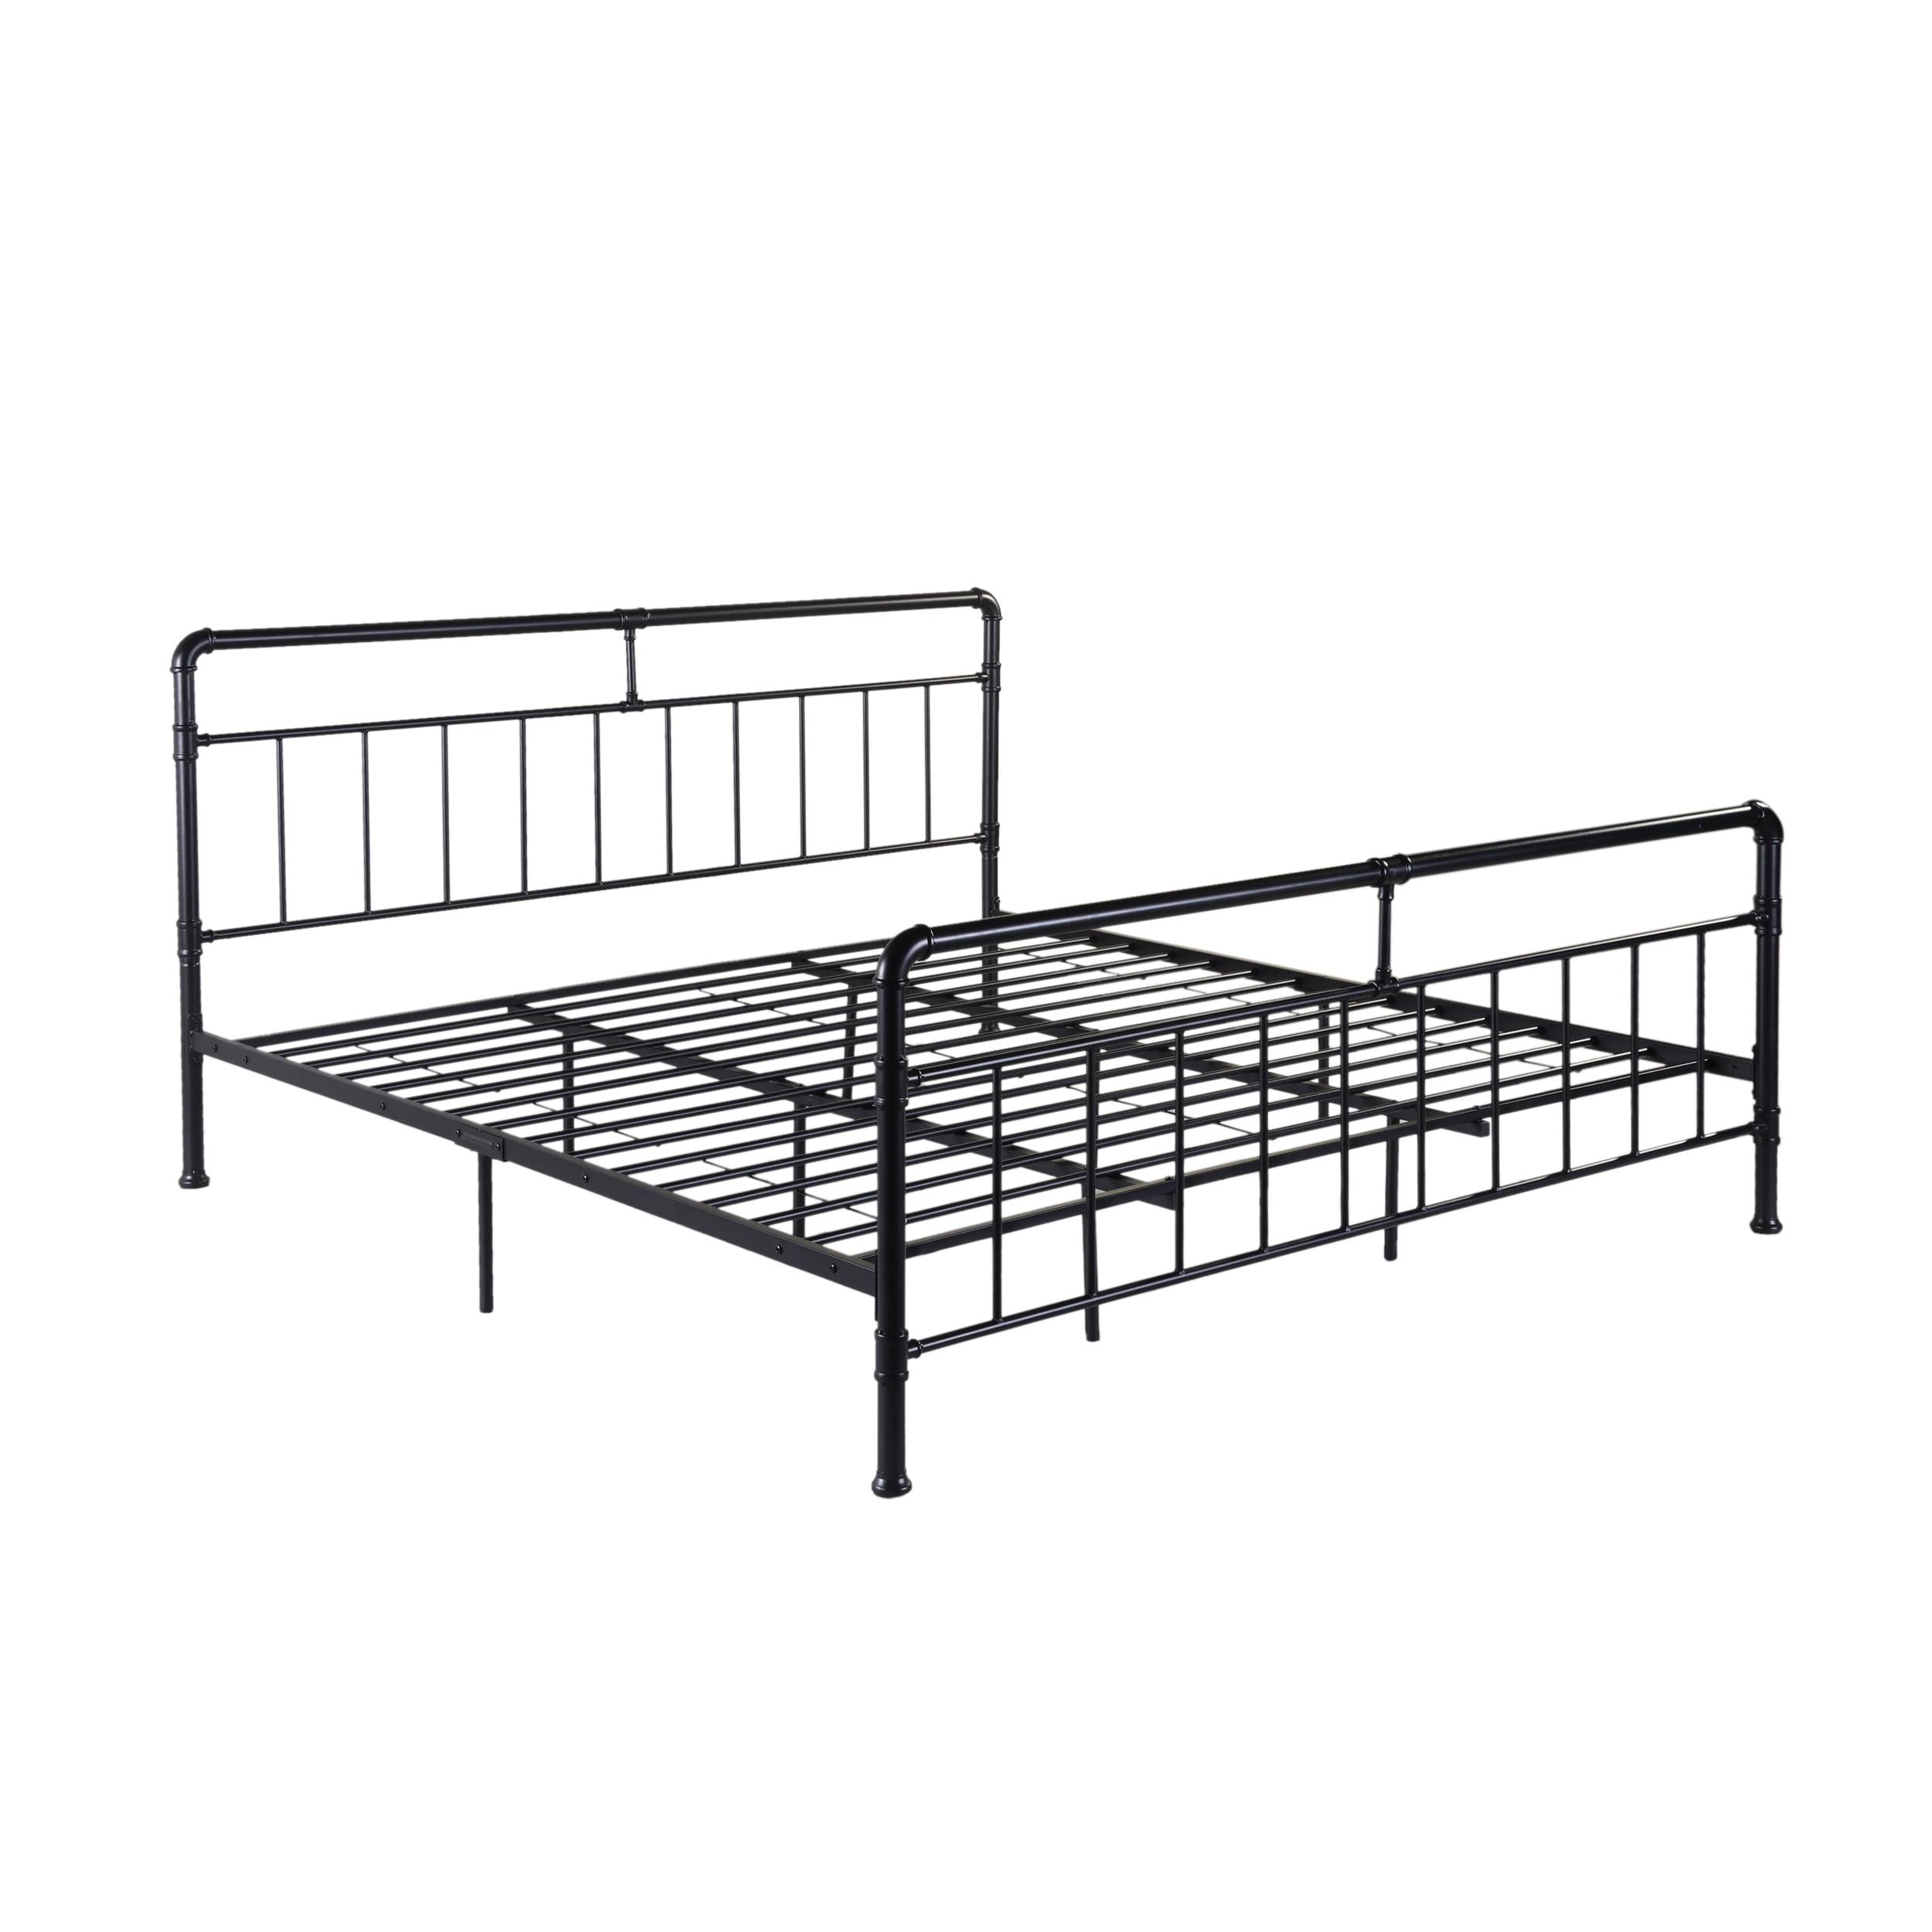 Flat Black King-Size Iron Bed Frame with Industrial Minimal Design